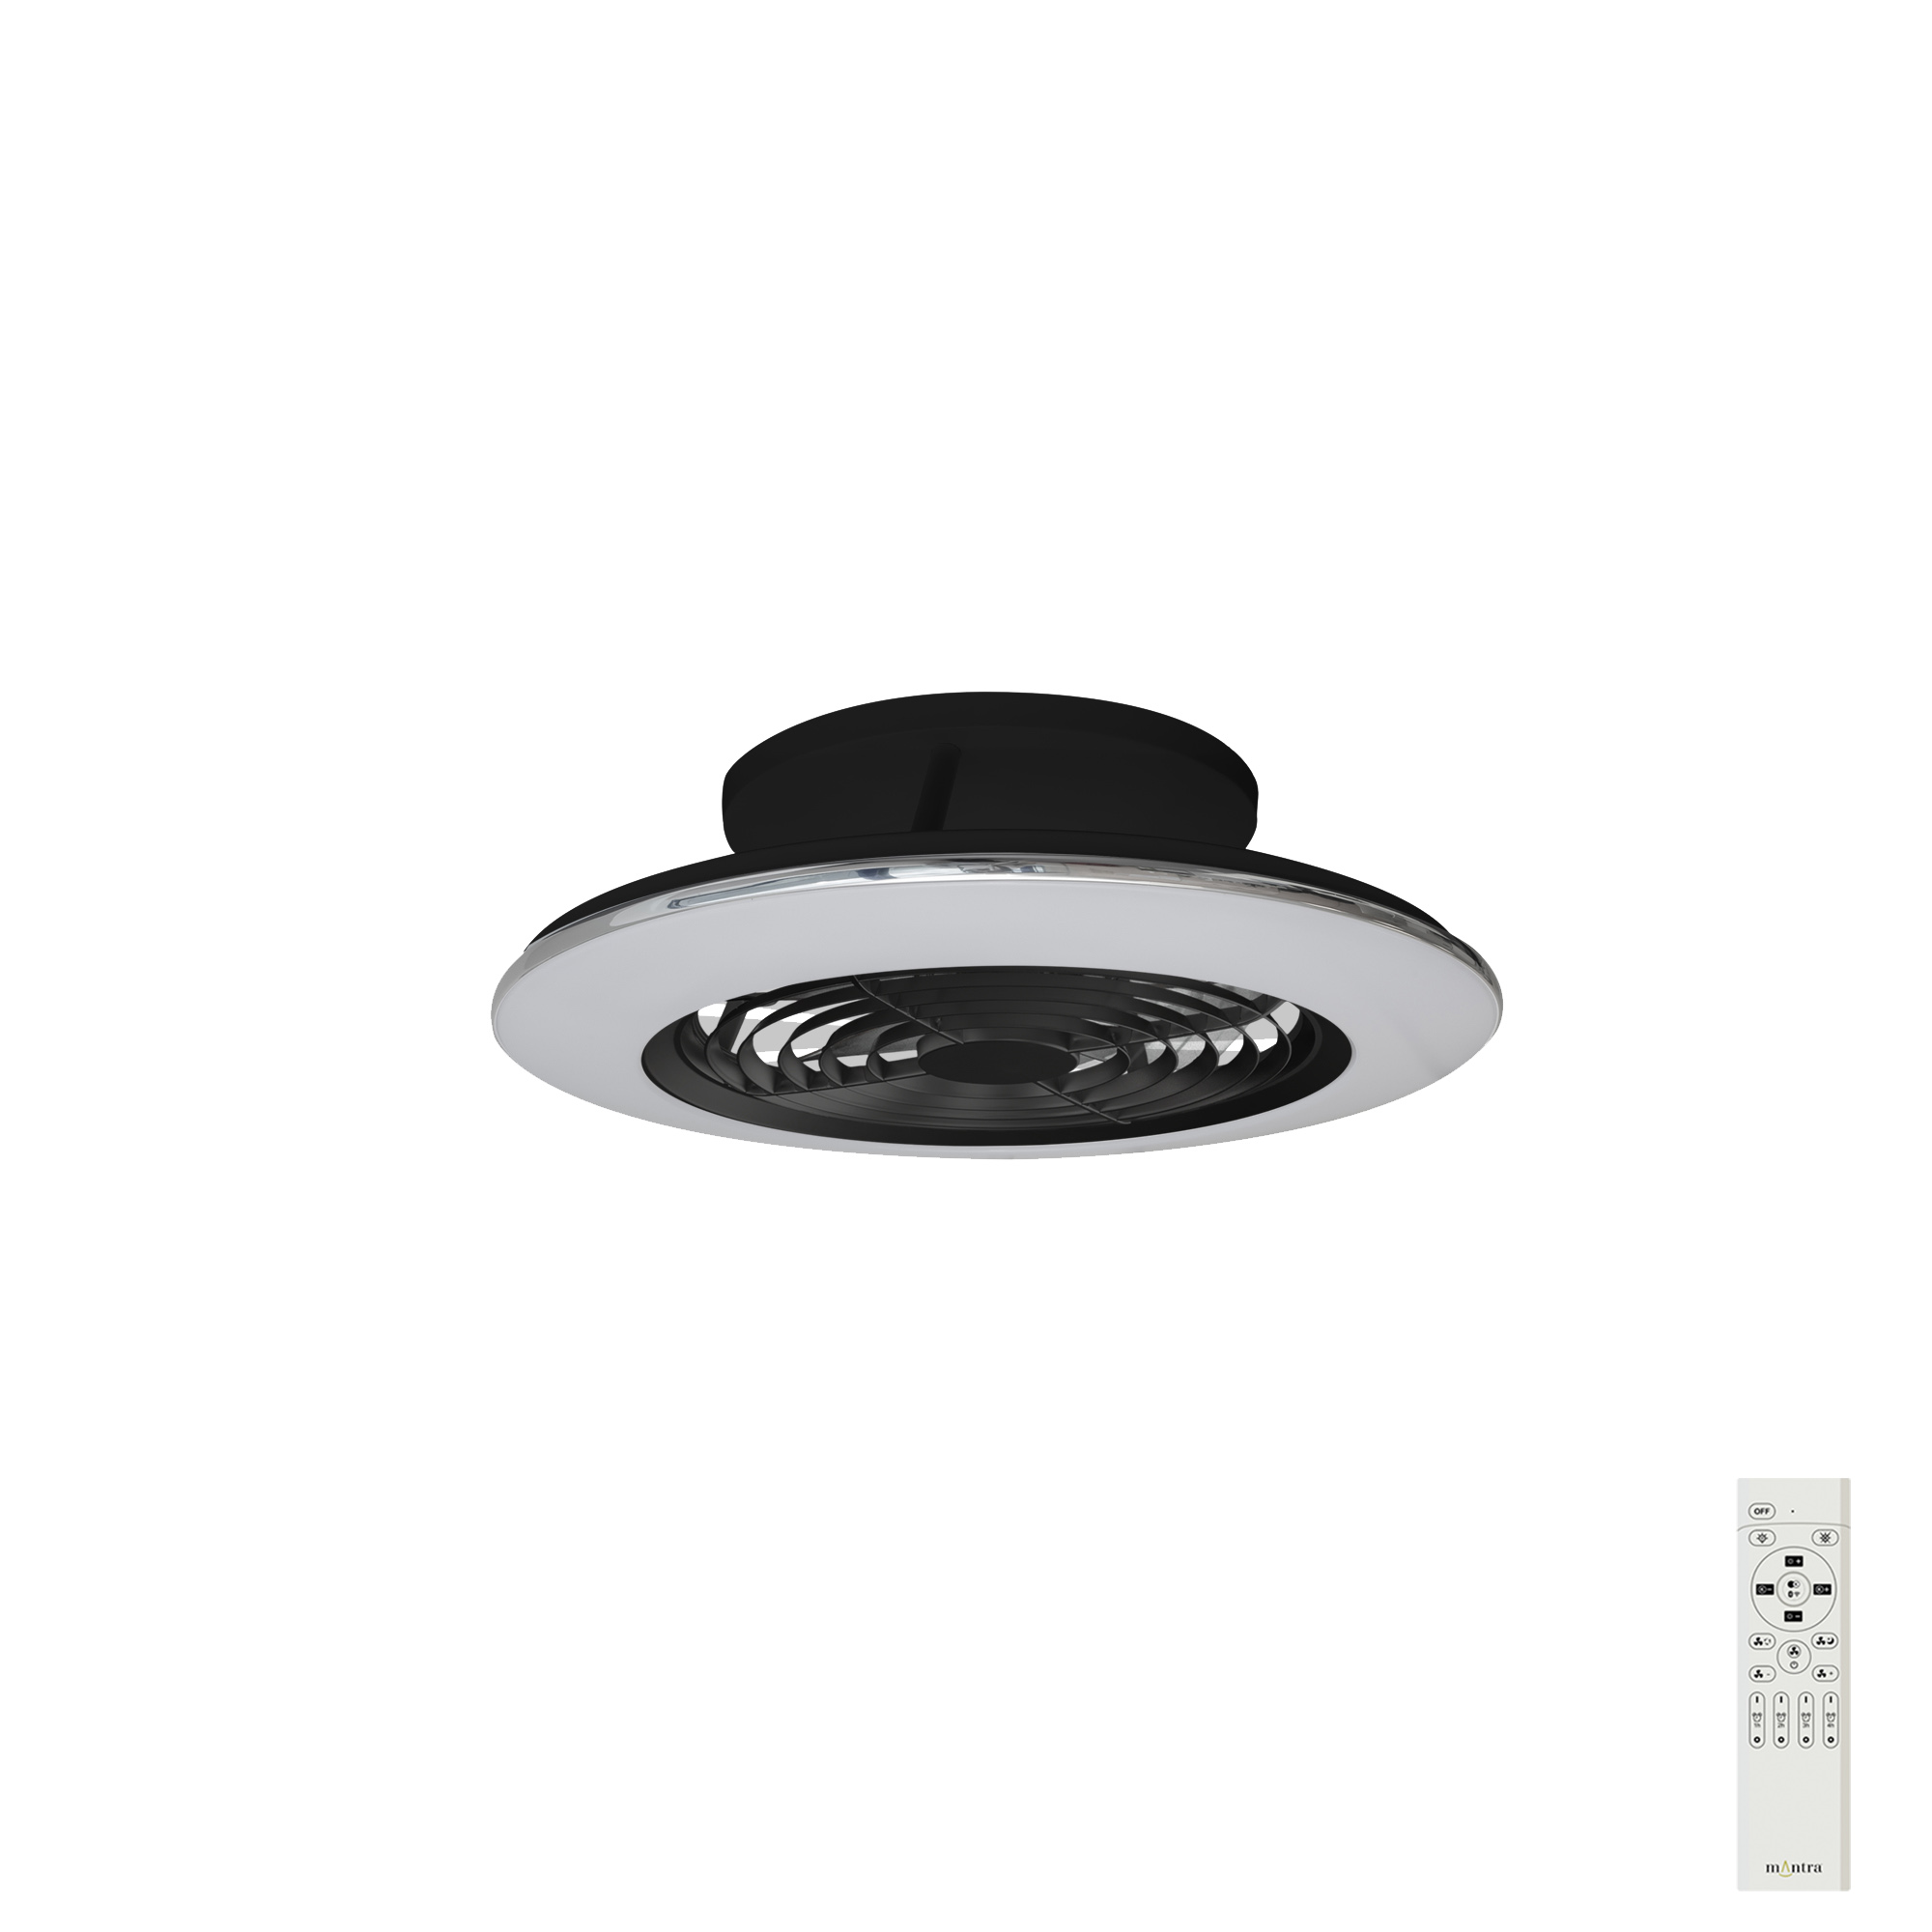 M7495  Alisio Mini 70W LED Dimmable Ceiling Light & Fan; Remote Controlled Black